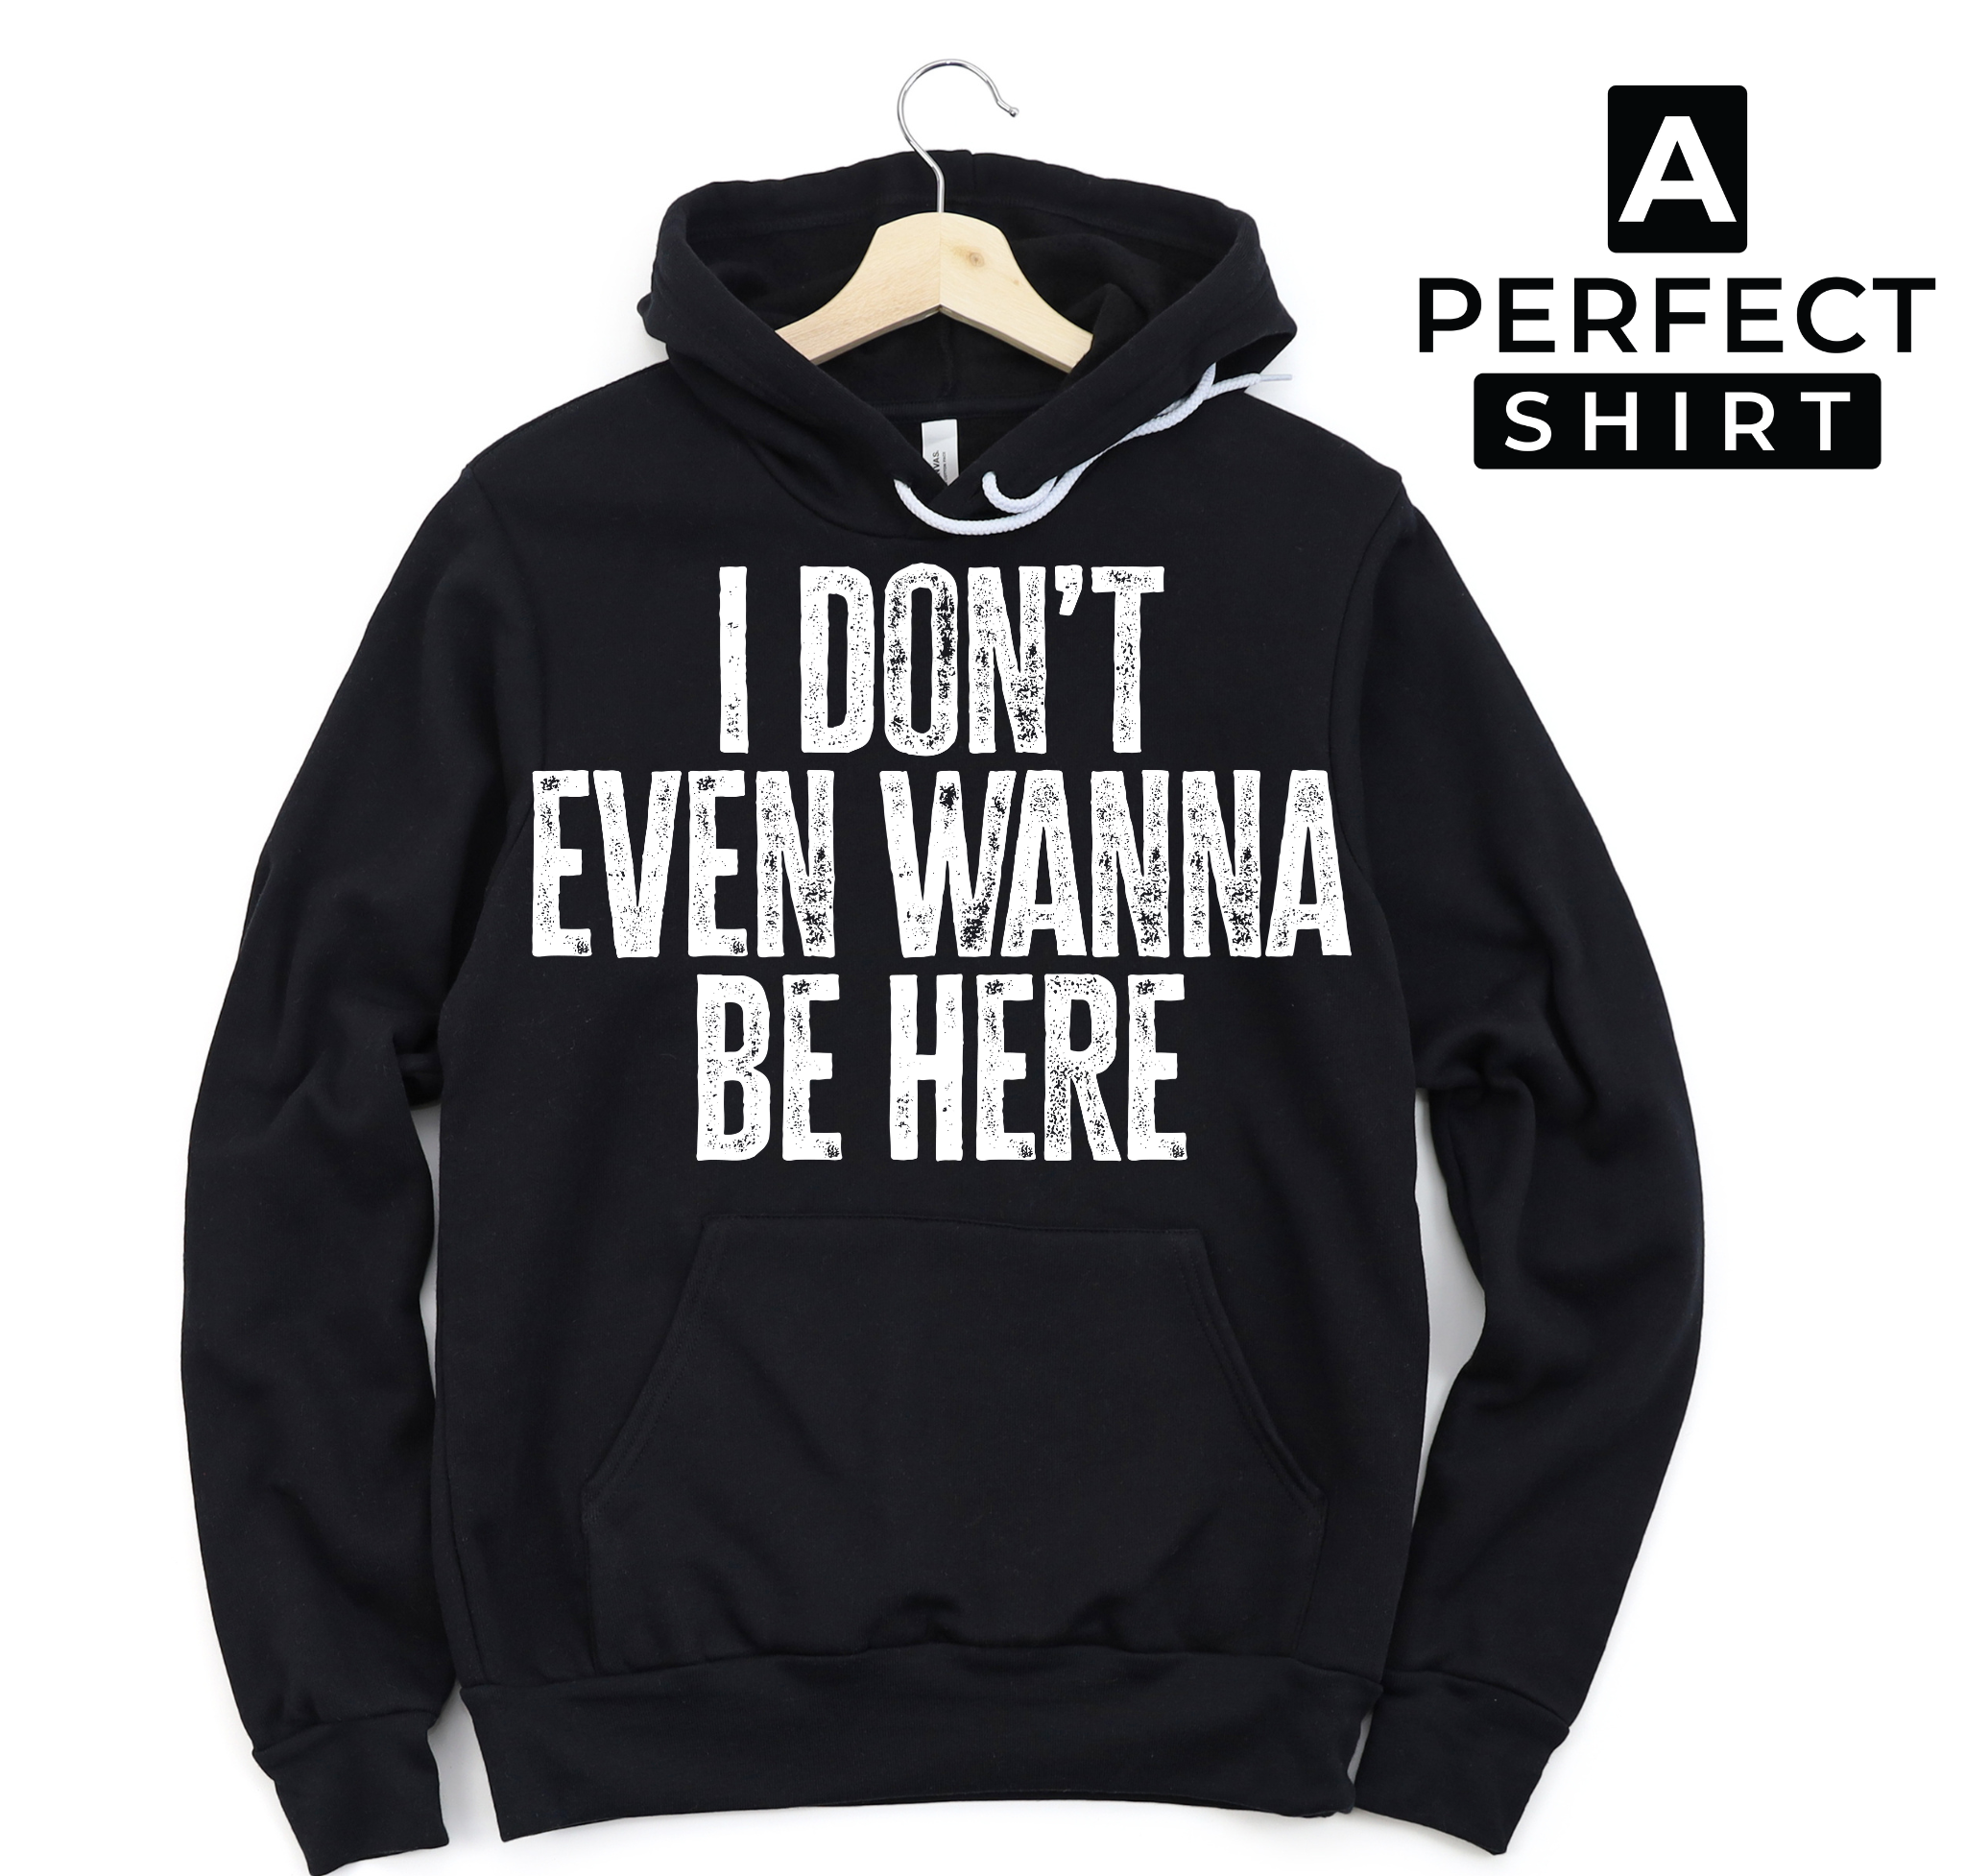 Family Holiday Matching Trendy Hooded Sweatshirt-clothing and culture-shop here at-A Perfect Shirt